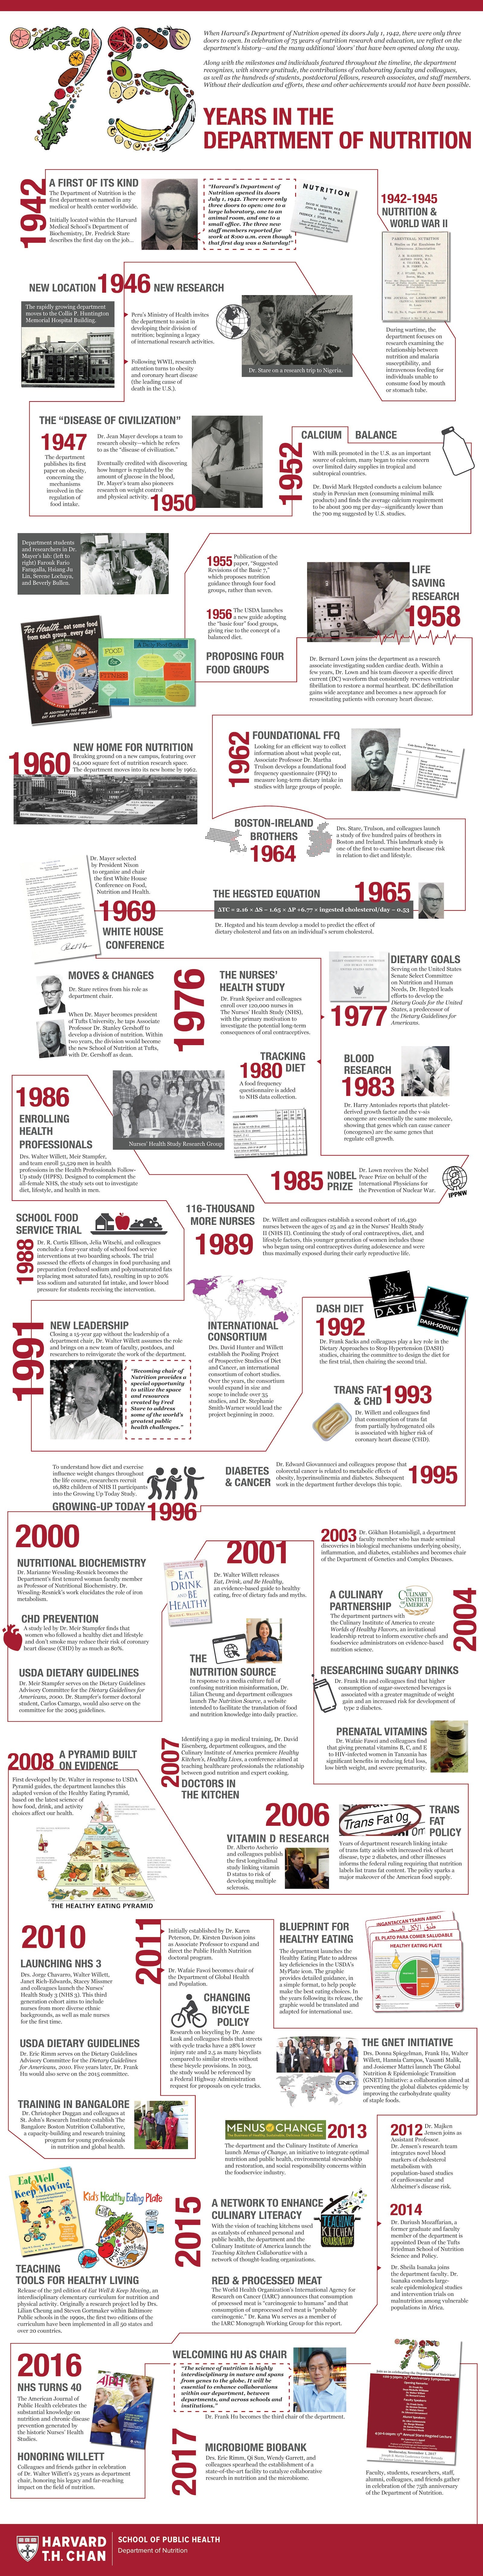 Timeline of 75 years in the Department of Nutrition